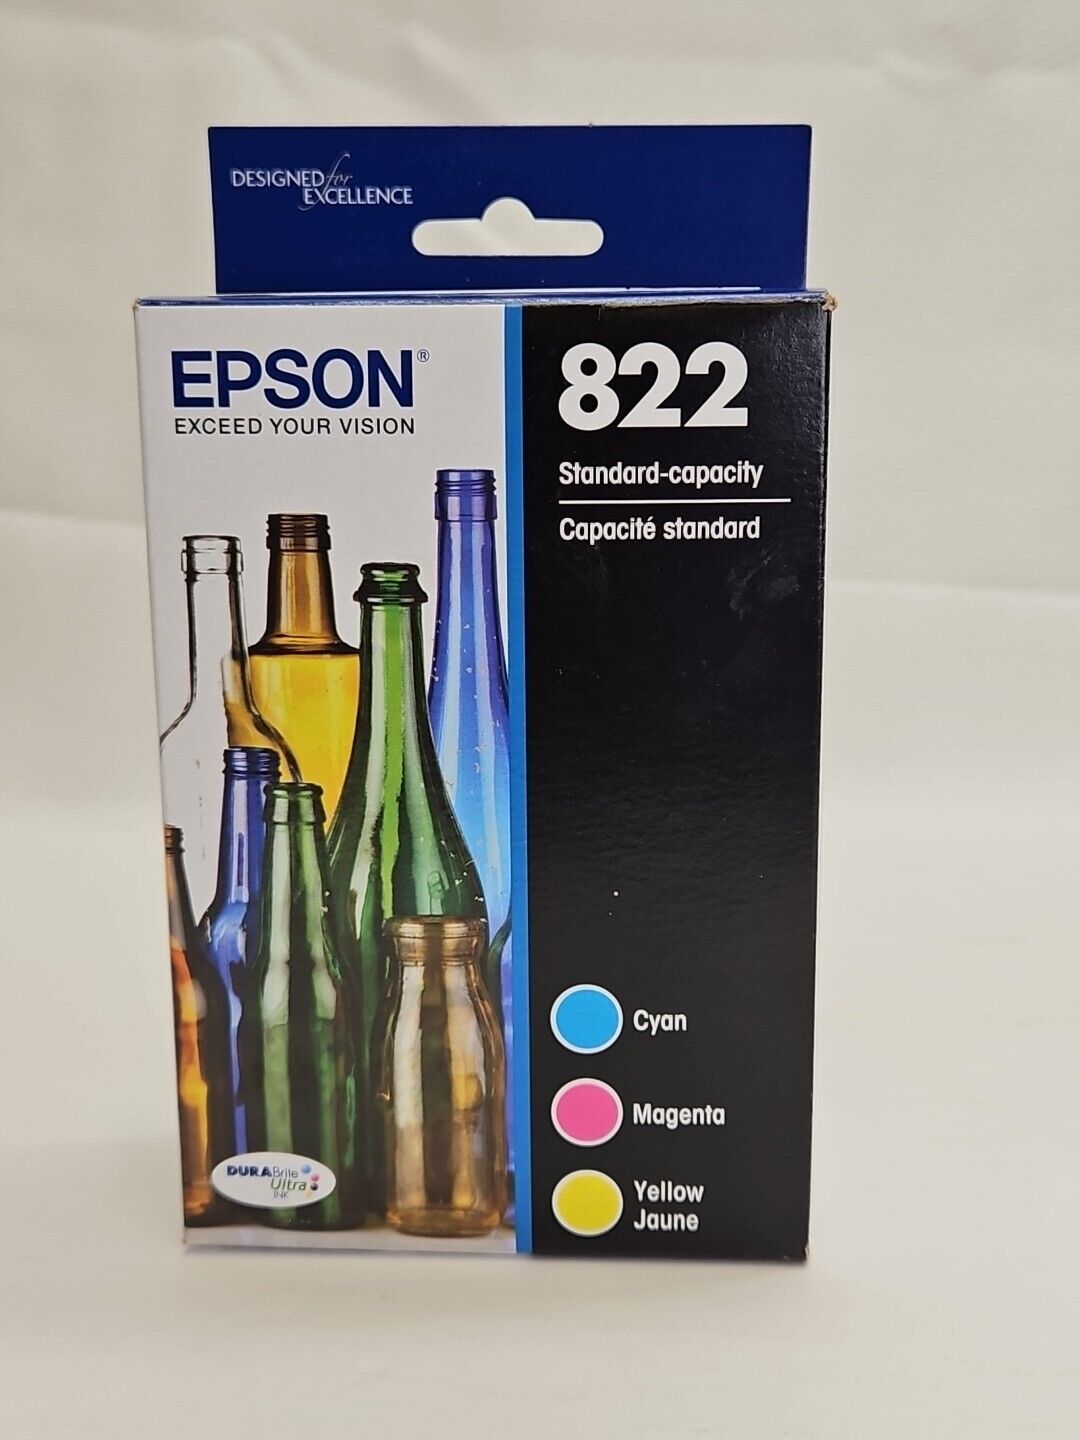 Epson Ink Cartridge 822 Standard Capacity C M Y Check pics for compatibility